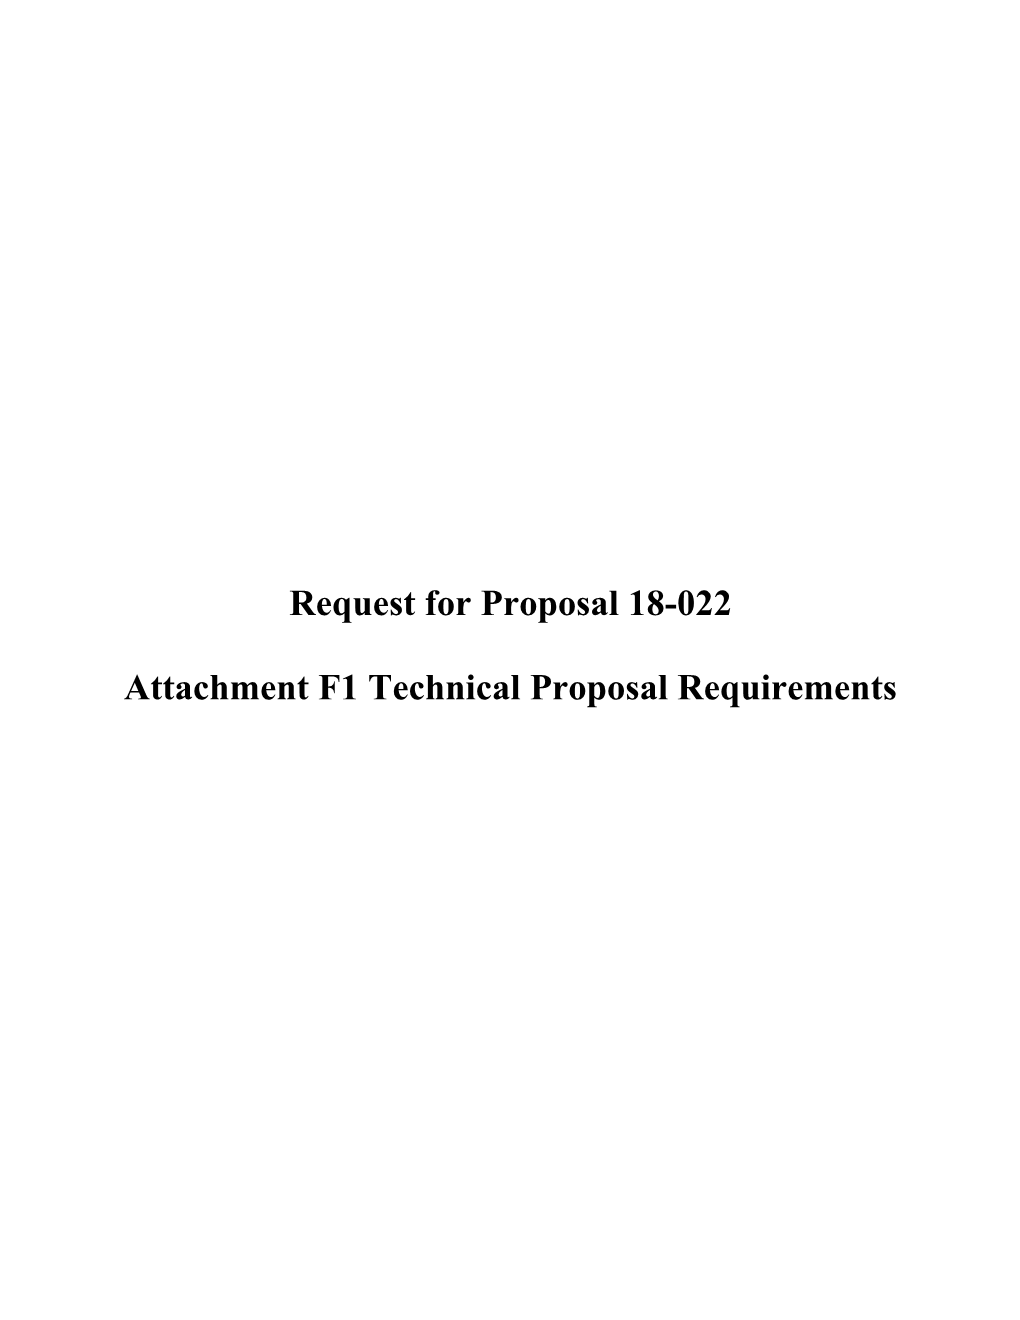 Attachment F1 Technical Proposal Requirements